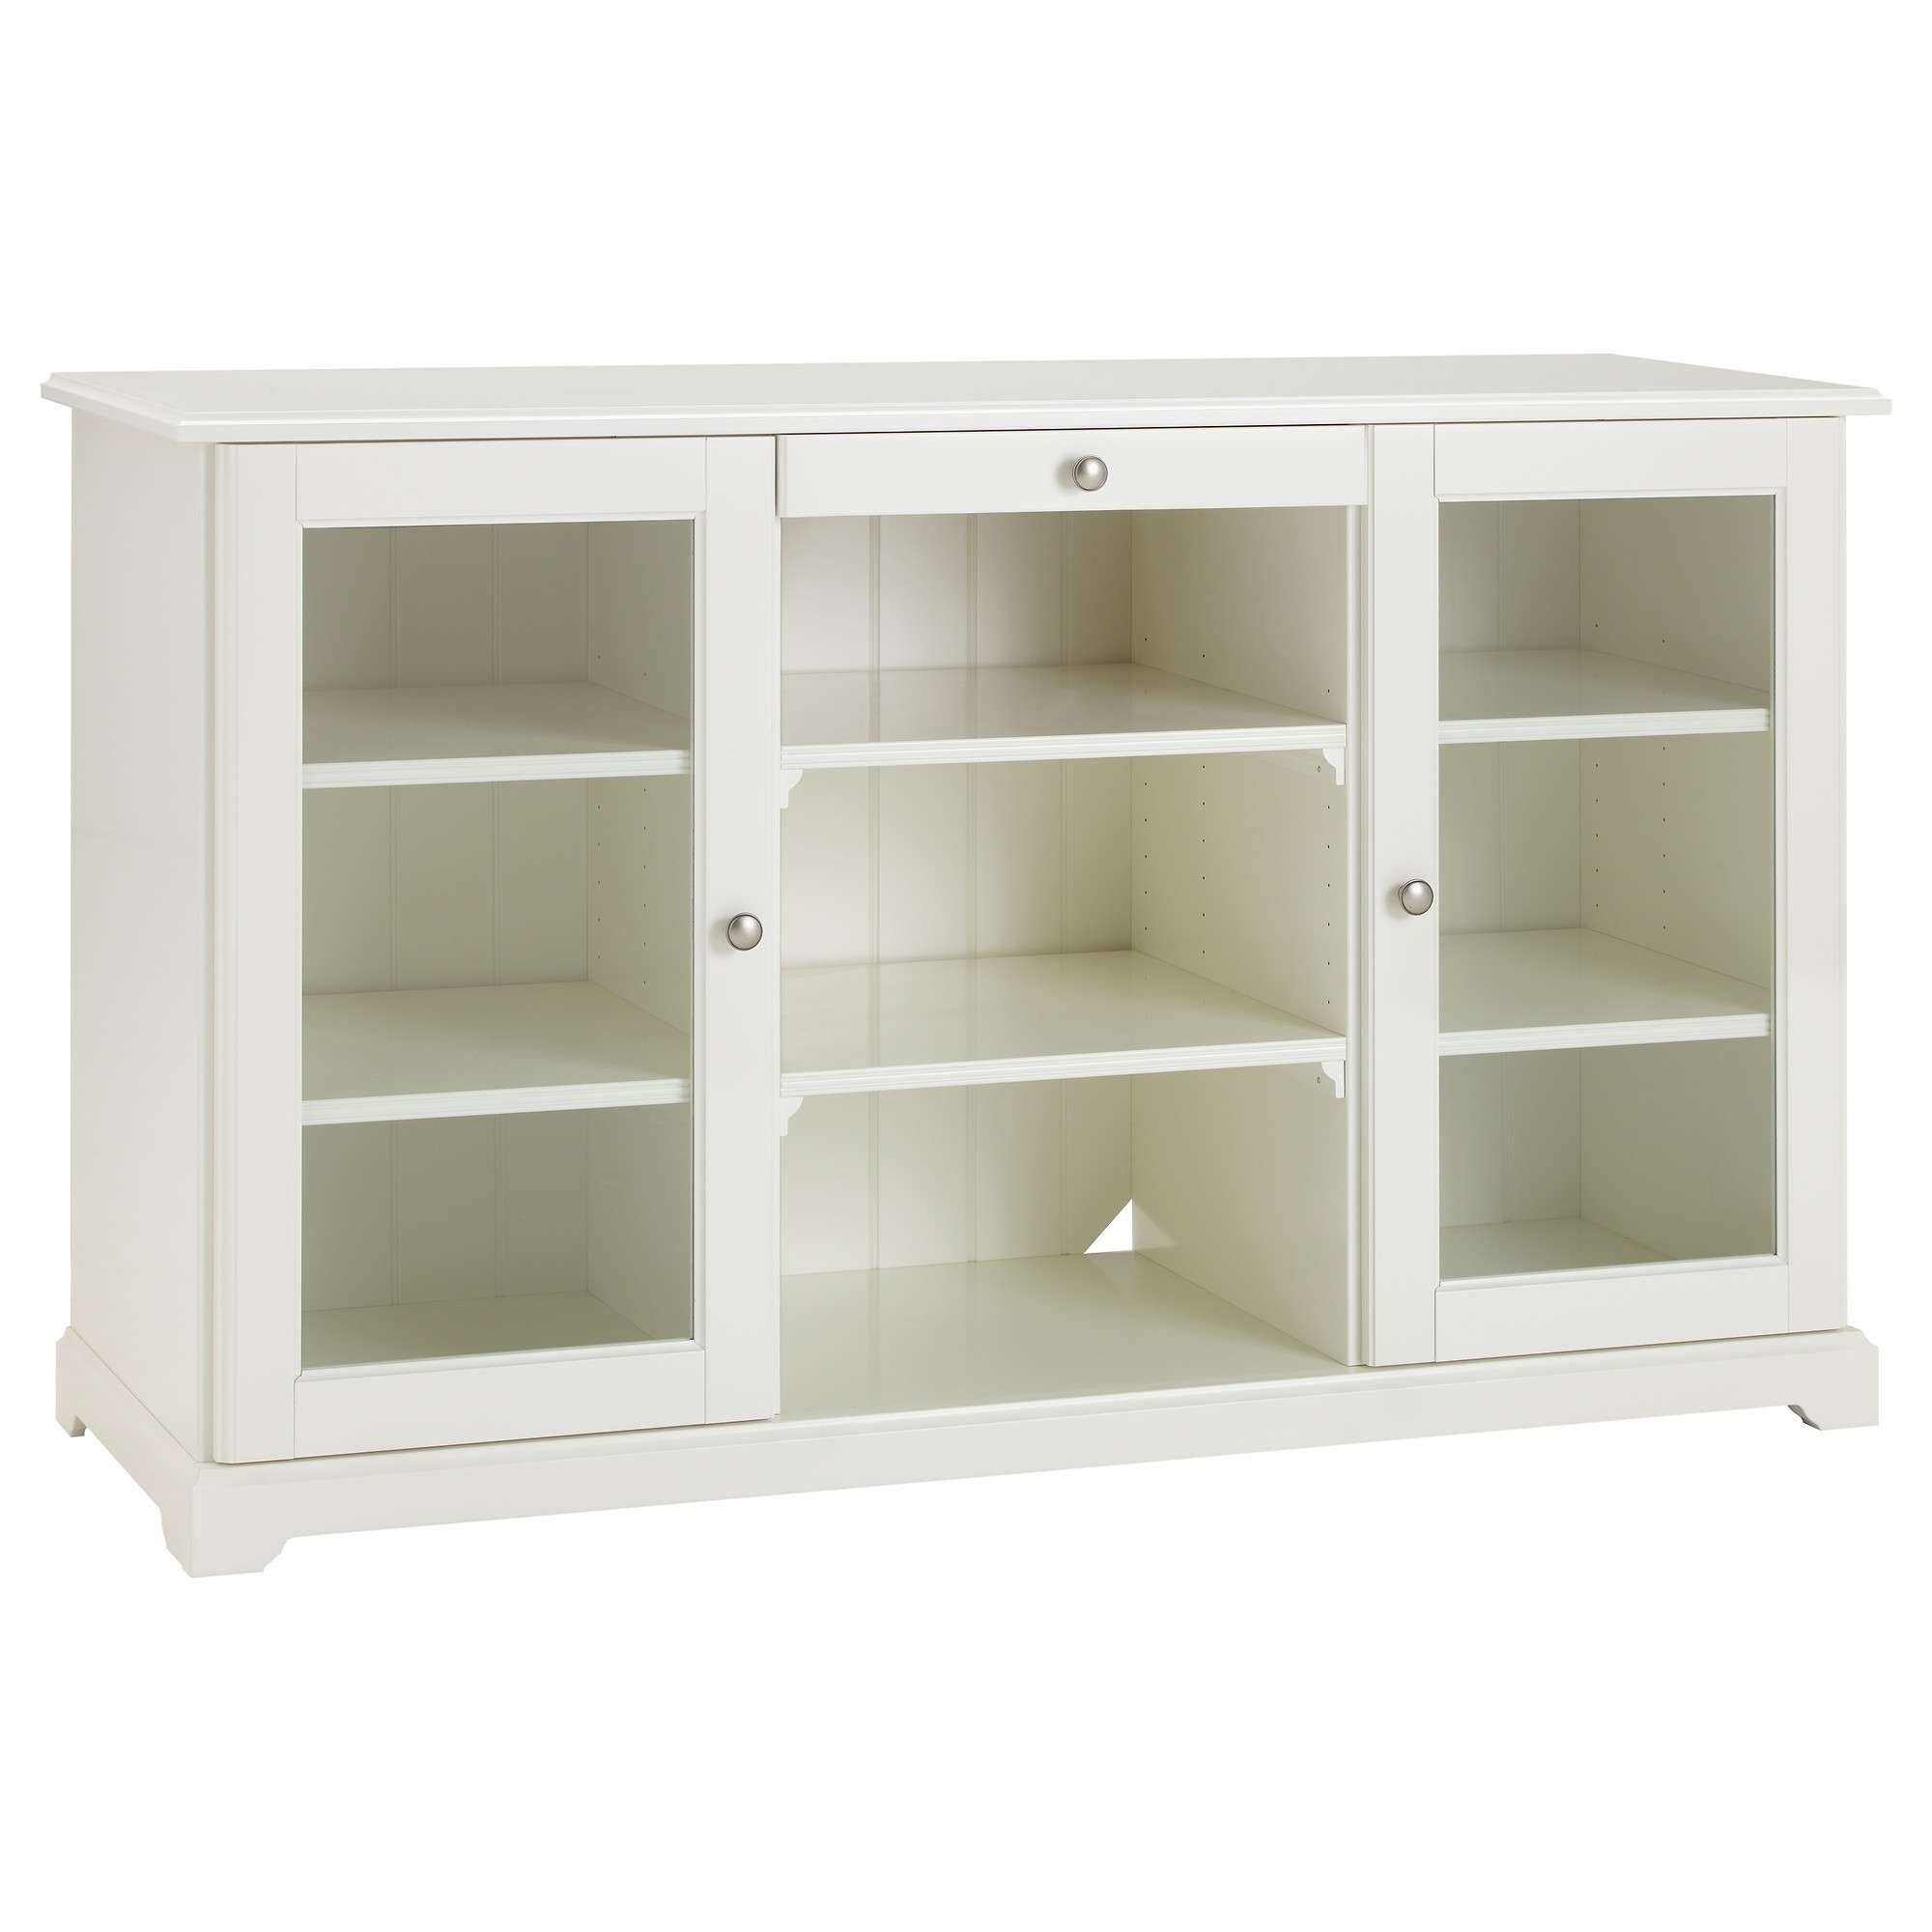 Liatorp Sideboard – White – Ikea In White Sideboards Cabinets (View 2 of 20)